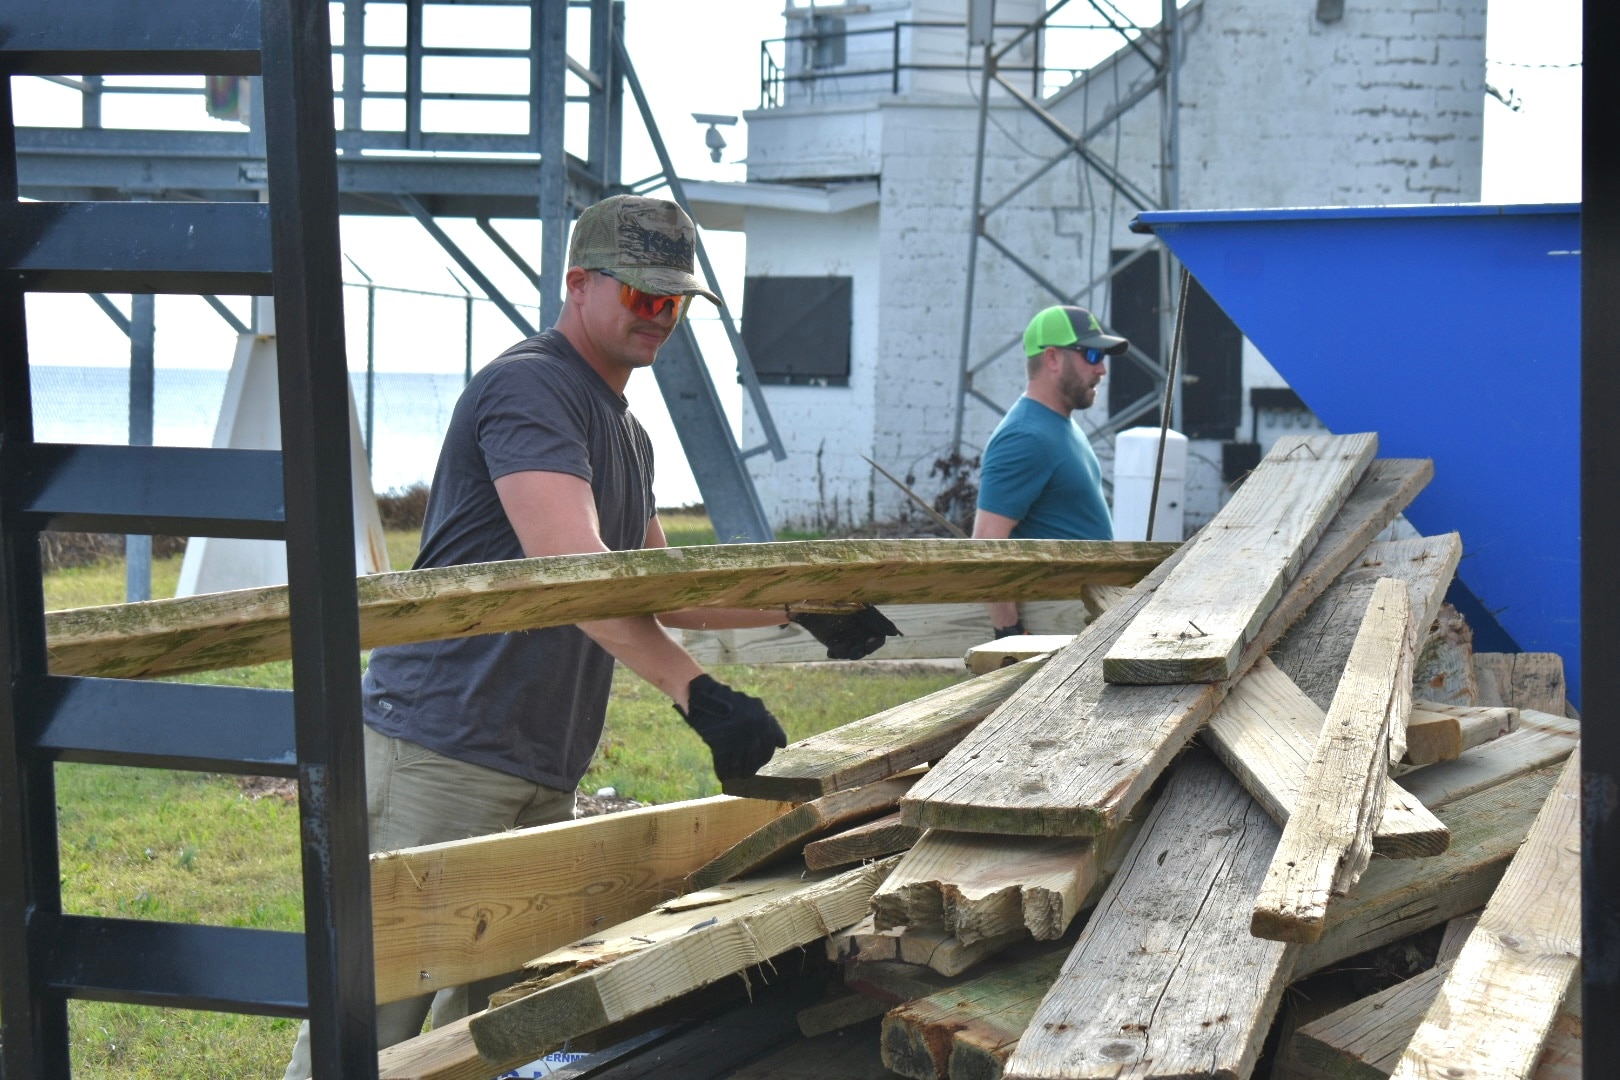 IMAGE: A member of the Potomac River Test Range (PRTR) maintenance crew stacks rouge planks onto a trailer during clean up around a Colonial Beach-based range station belonging to the PRTR. The planks were blown off and carried away during a windy tidal surge that occurred recently.